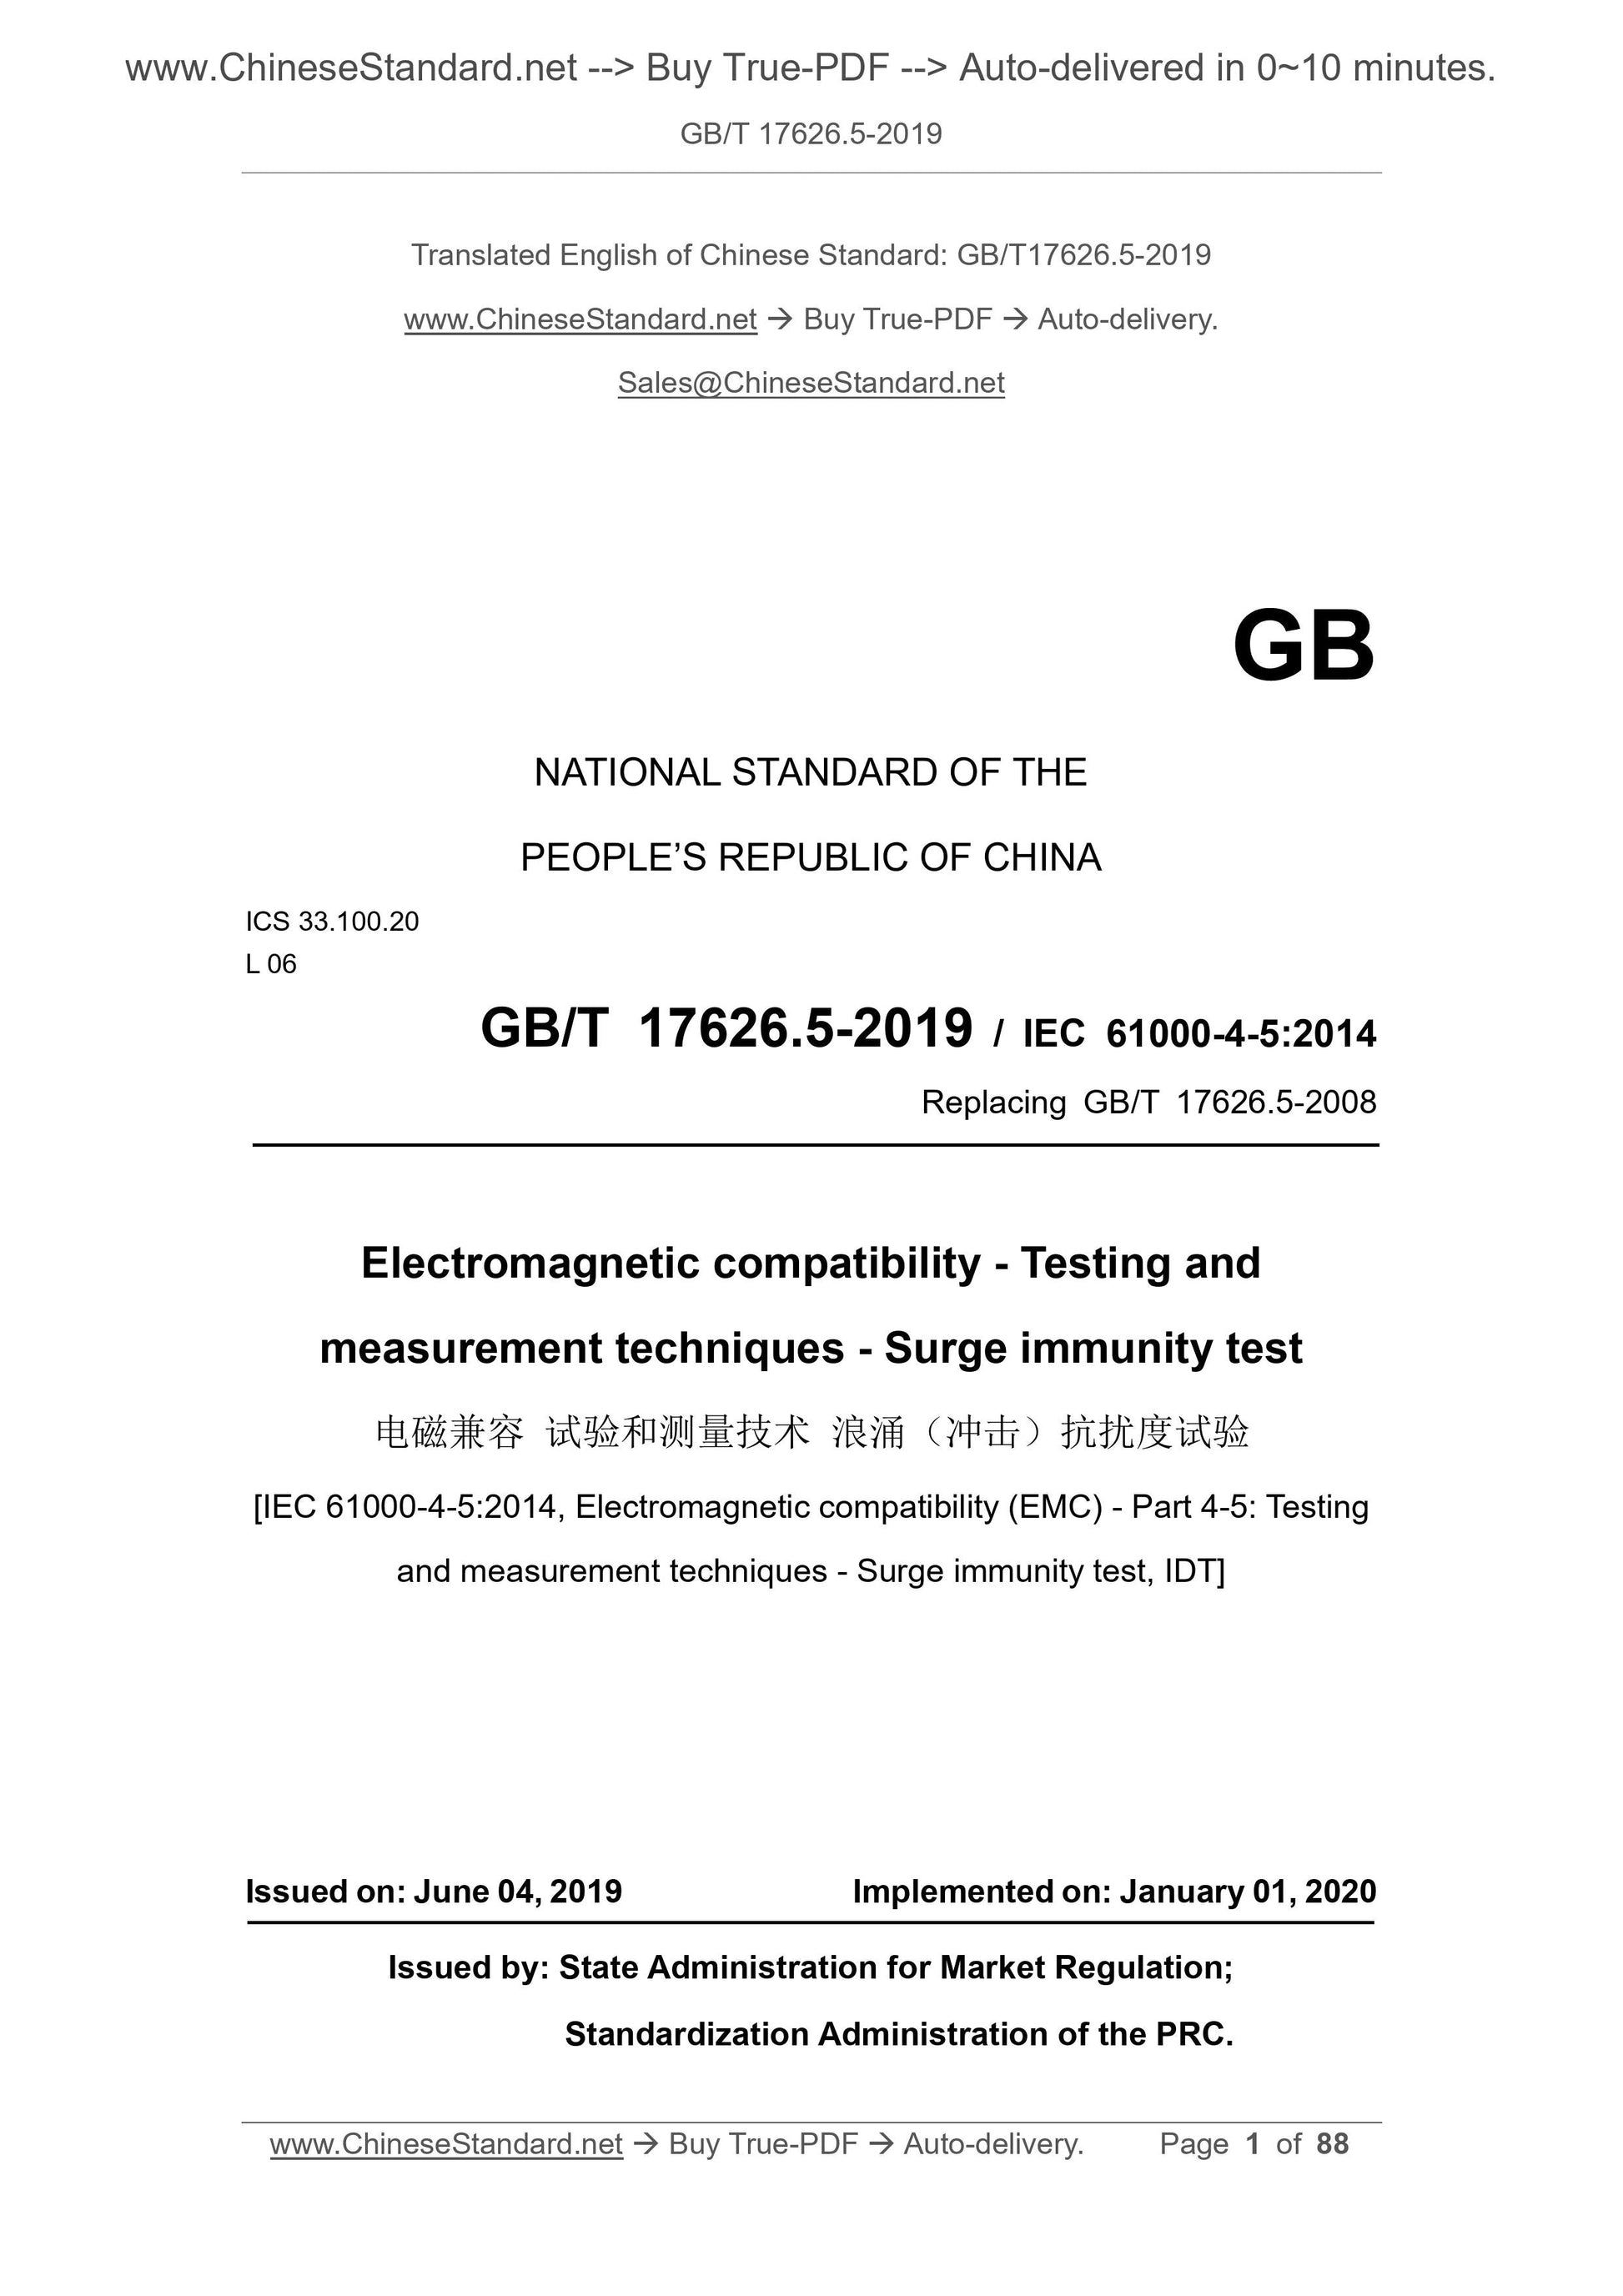 GB/T 17626.5-2019 Page 1